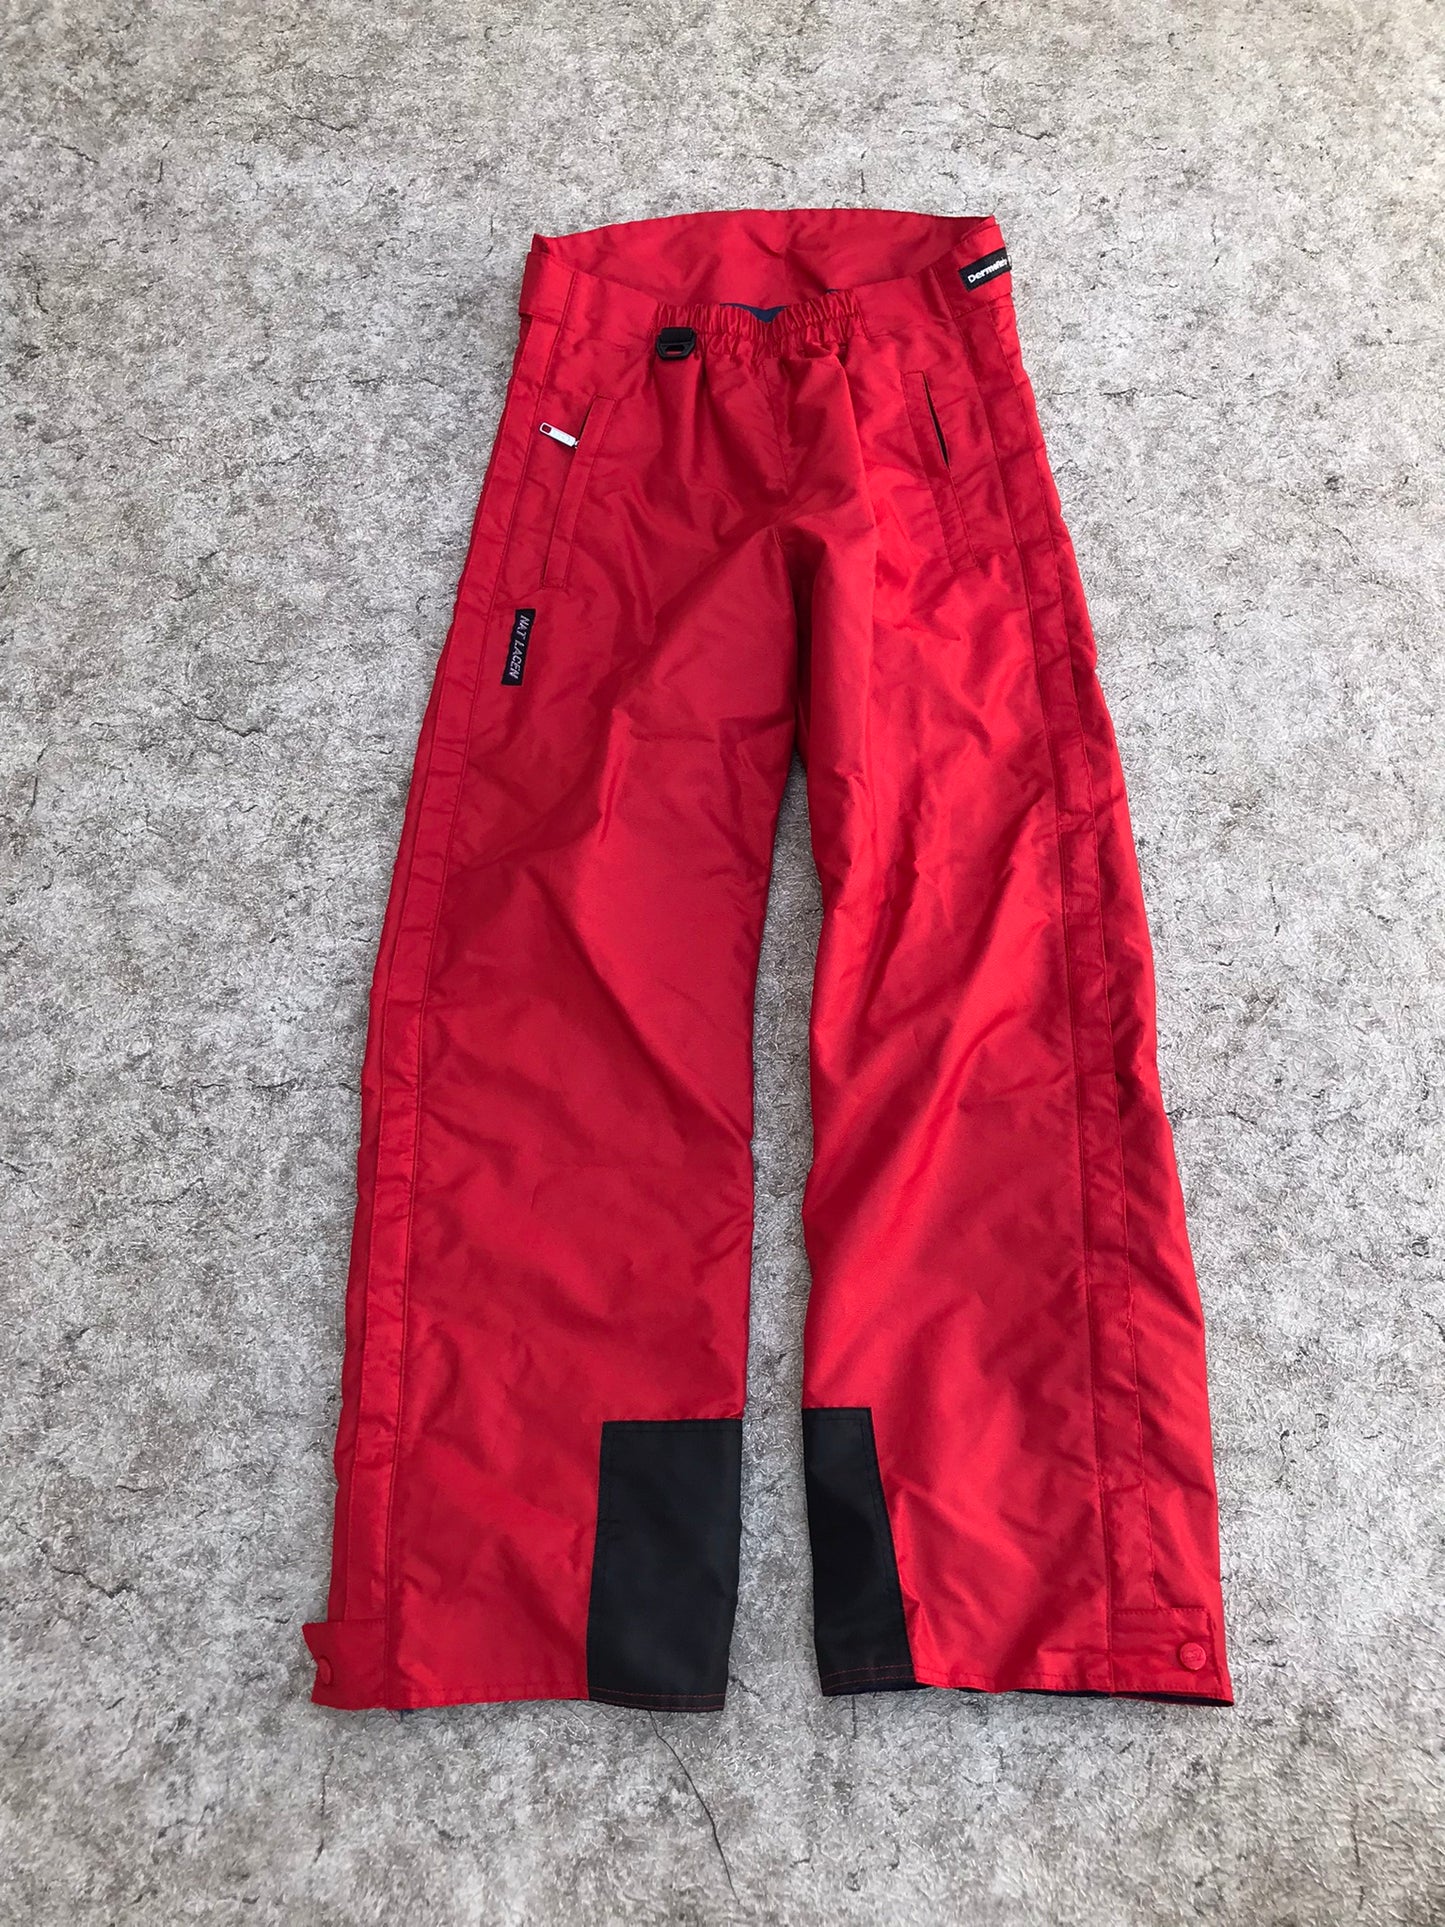 Snow Pants Men's Size Medium Waterproof Shell Full Zippers Up Both Legs As New  As New